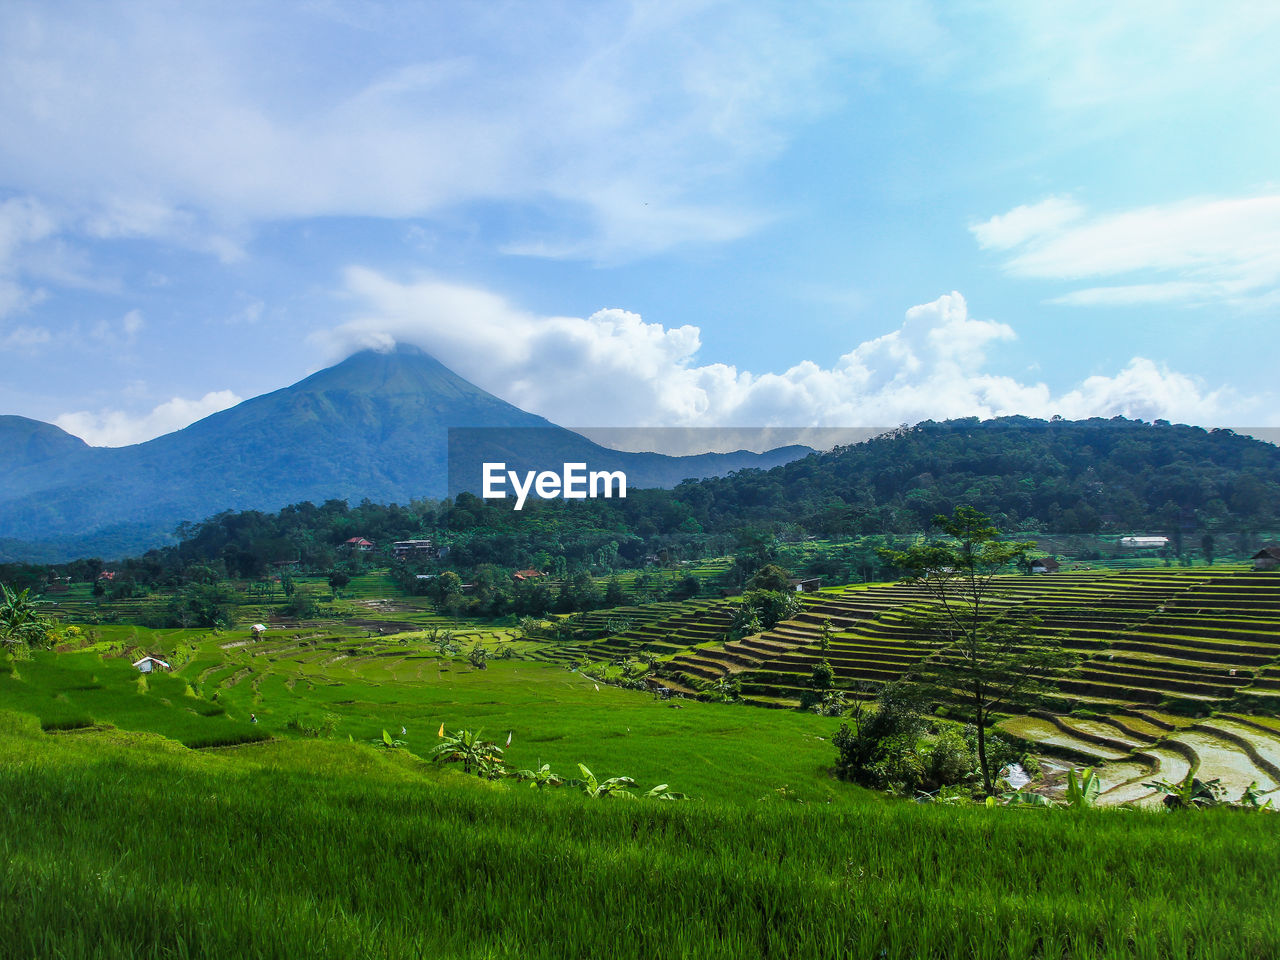 landscape, environment, mountain, agriculture, land, scenics - nature, field, plant, rural scene, grassland, sky, nature, crop, plain, beauty in nature, farm, rural area, green, highland, rice, cloud, rice paddy, growth, paddy field, plateau, meadow, mountain range, pasture, no people, tranquility, social issues, food and drink, terrace, valley, rice - food staple, travel, environmental conservation, outdoors, tranquil scene, grass, tree, food, architecture, terraced field, building, plantation, day, travel destinations, foliage